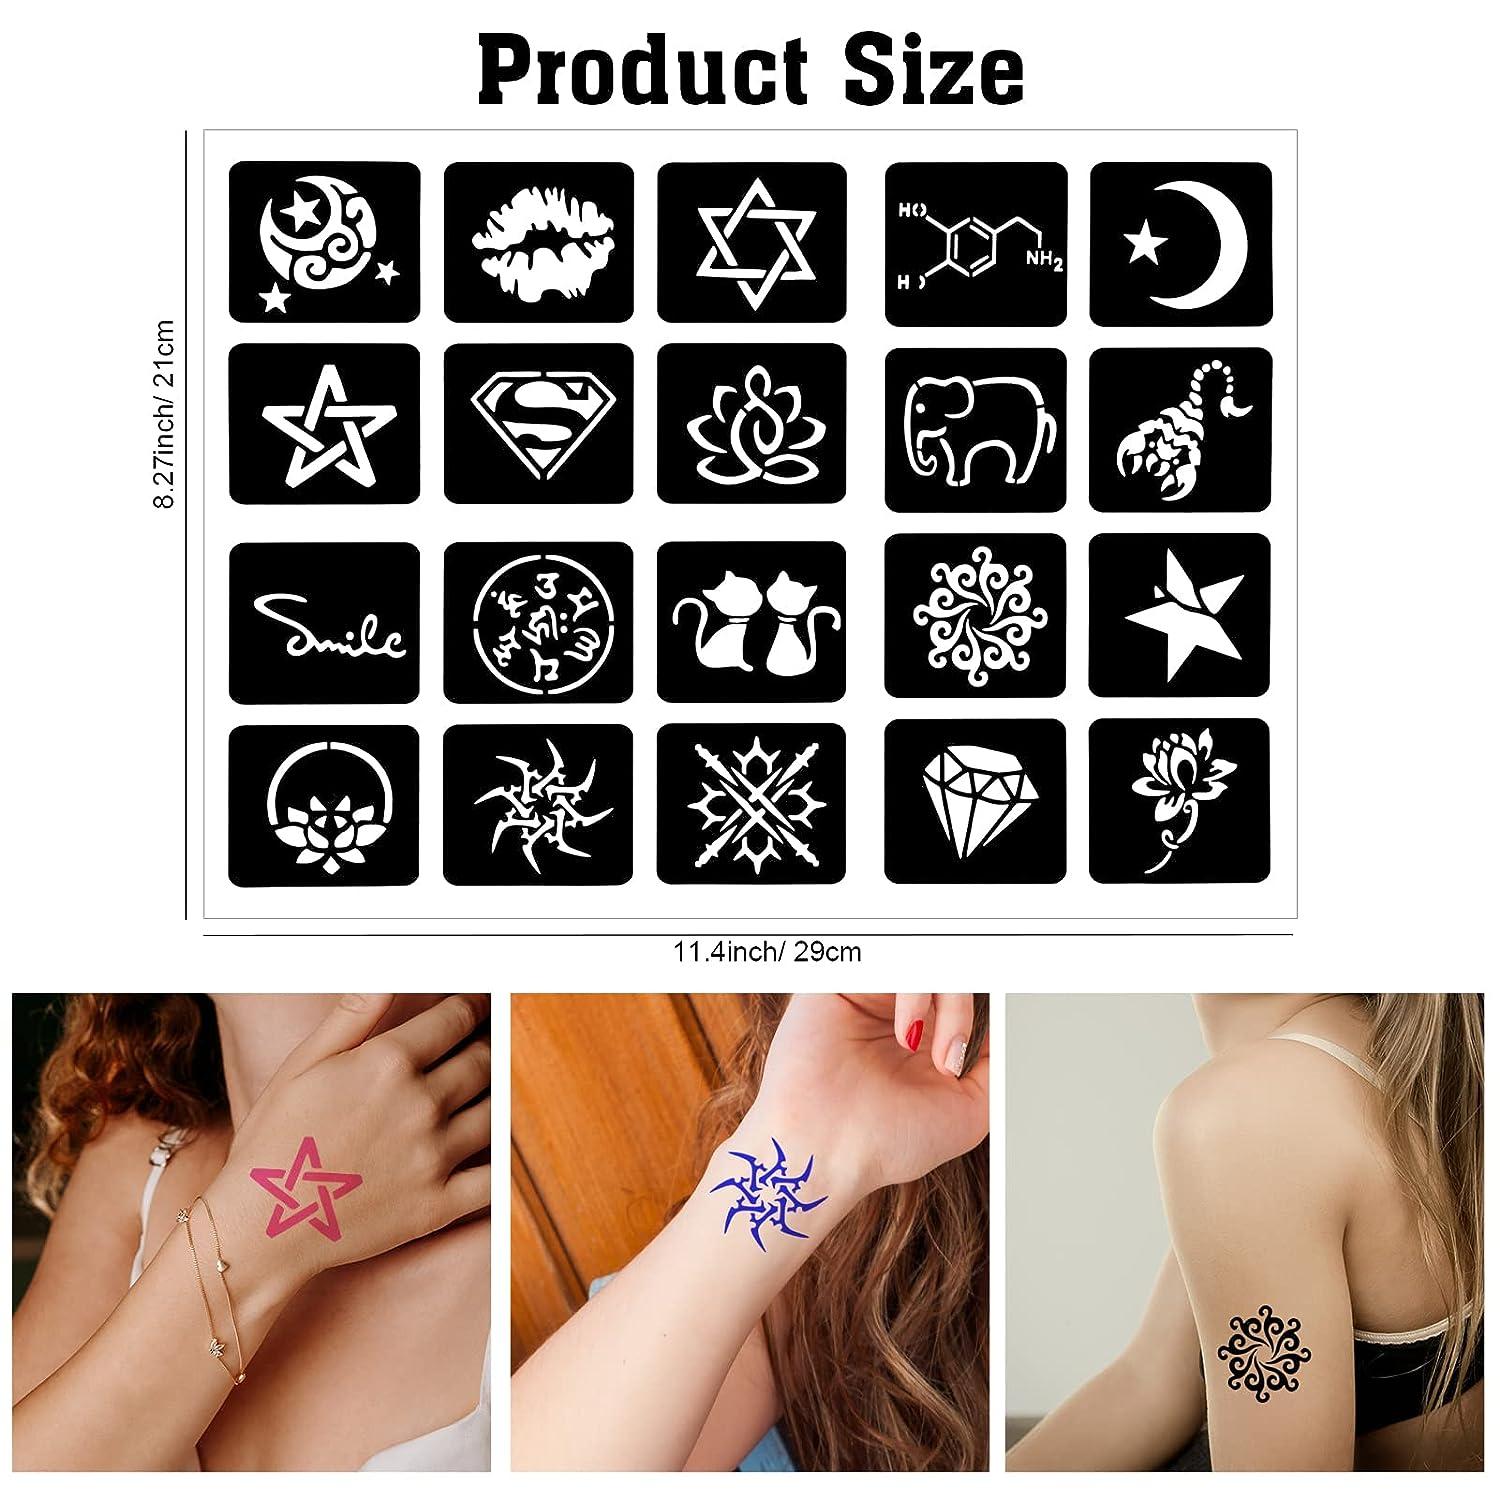 Amazon.com : 3Pcs Gothic Letters DIY Name Body Art Tattoo Stickers Fake Tattoos  Designs : Beauty & Personal Care